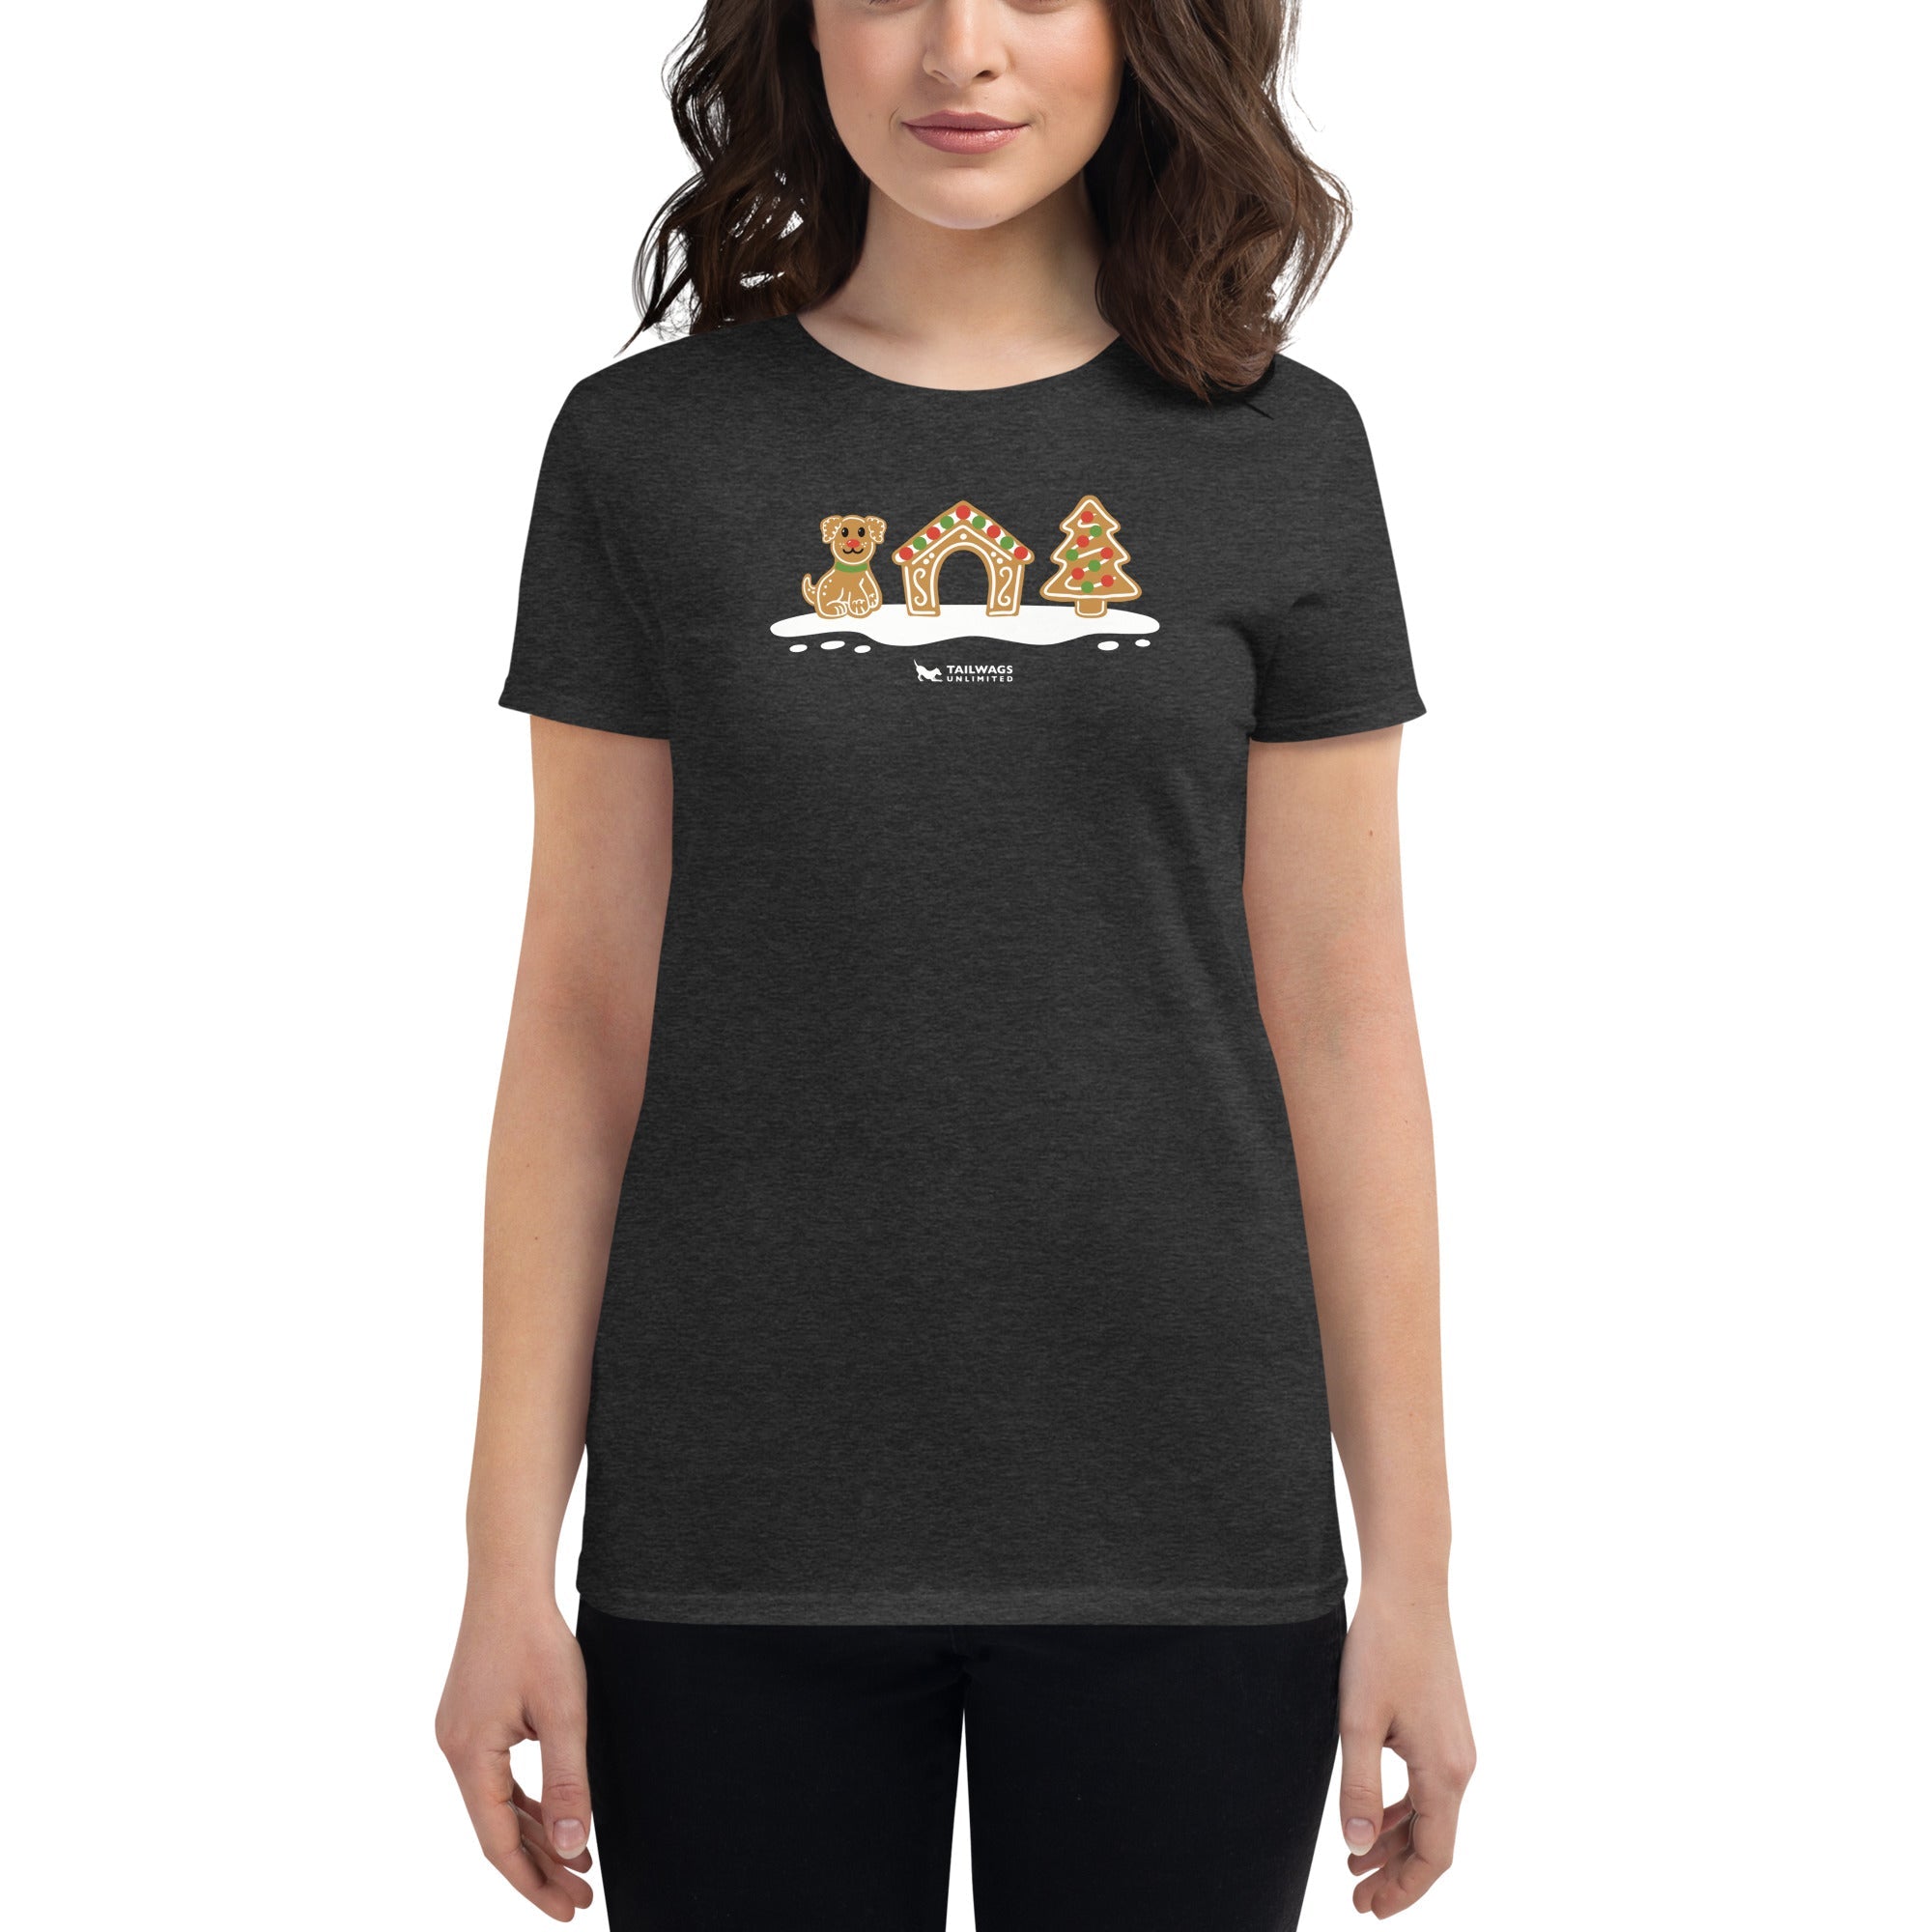 Gingerbread Doghouse Women's Fit T-Shirt - TAILWAGS UNLIMITED